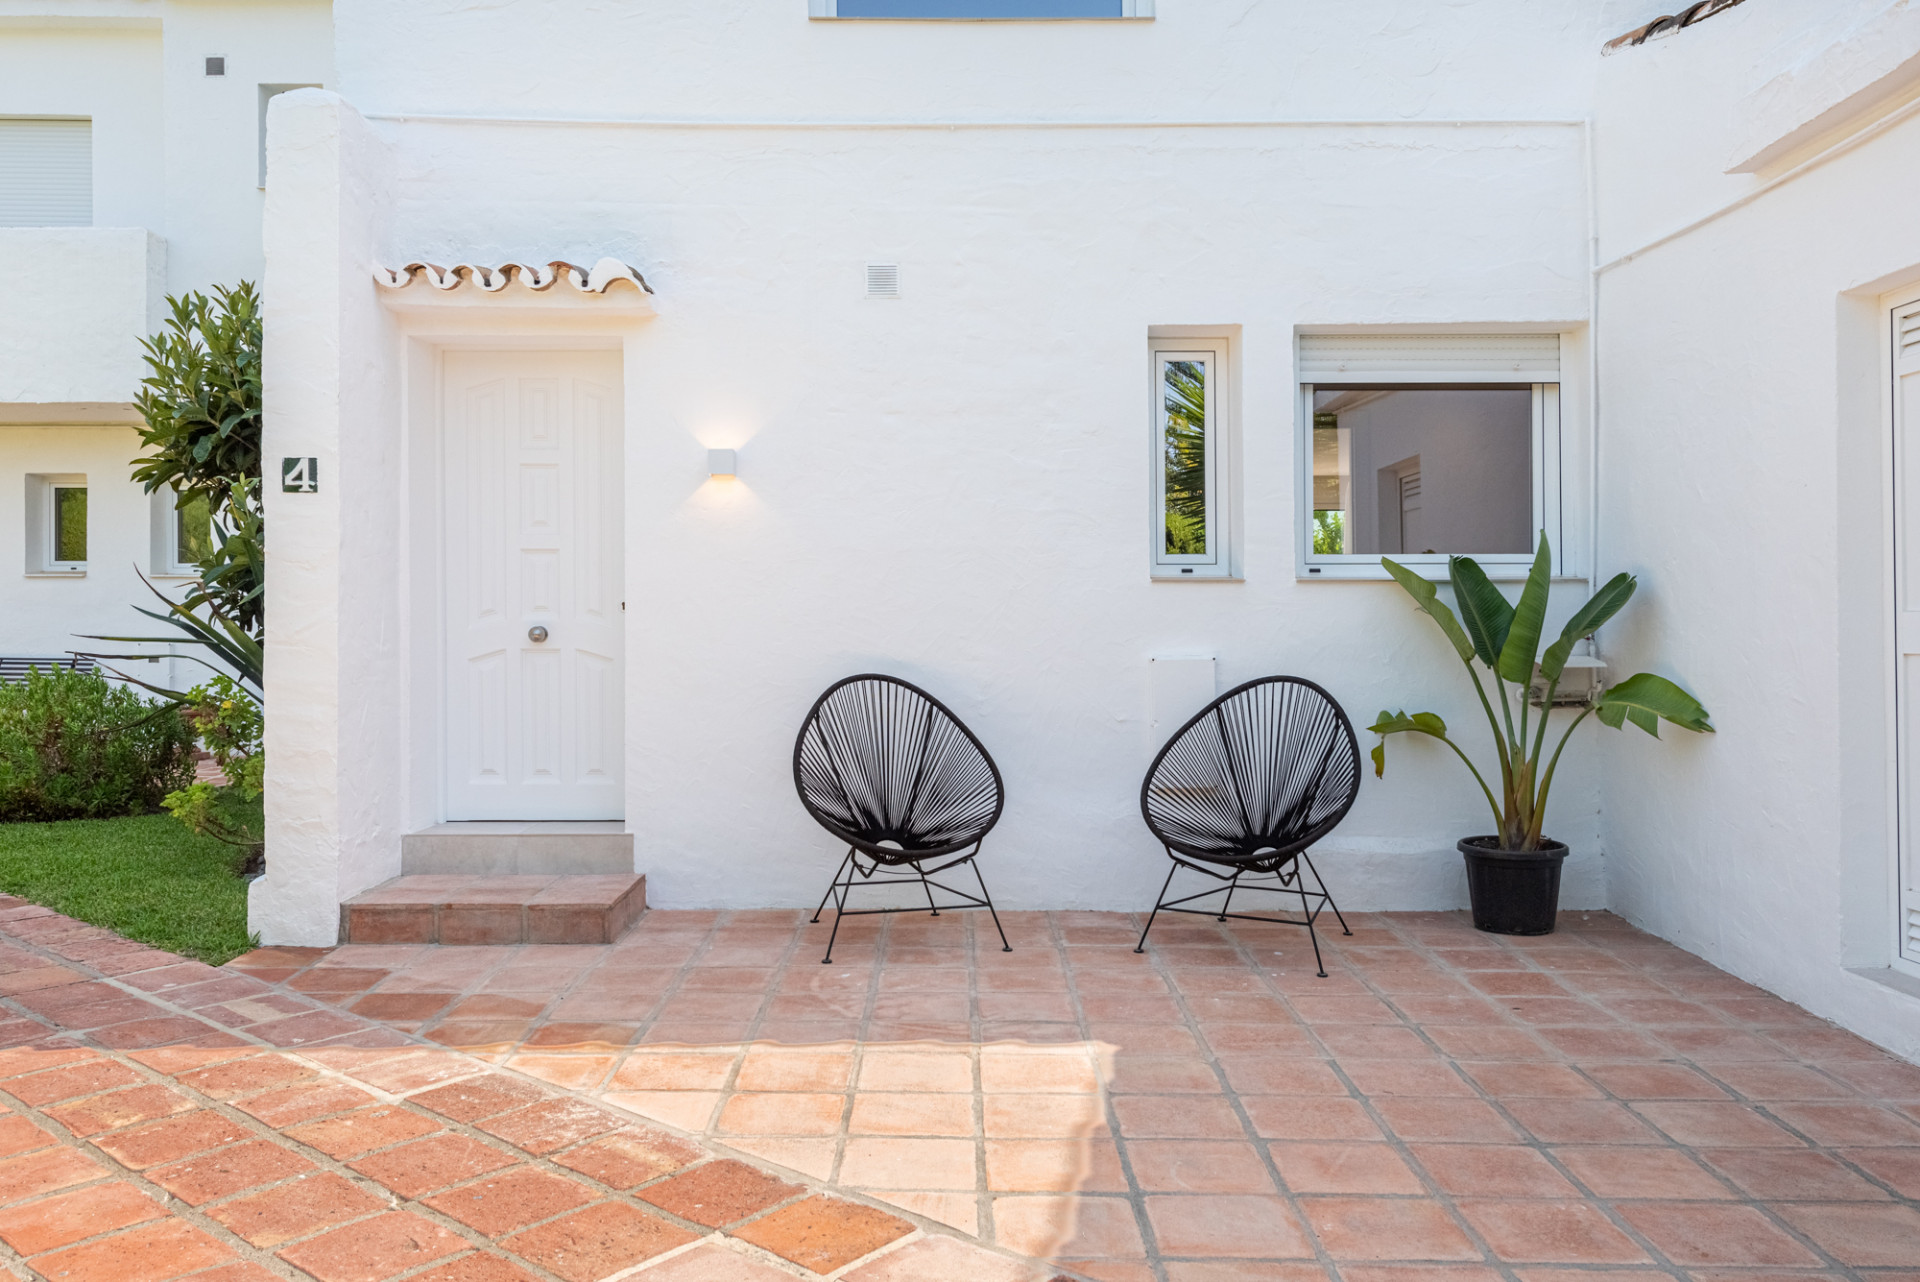 If you’ve dreamed of a home in the Spanish sunshine, offering space, style and serene surrounds, have a look at this townhouse in Aloha